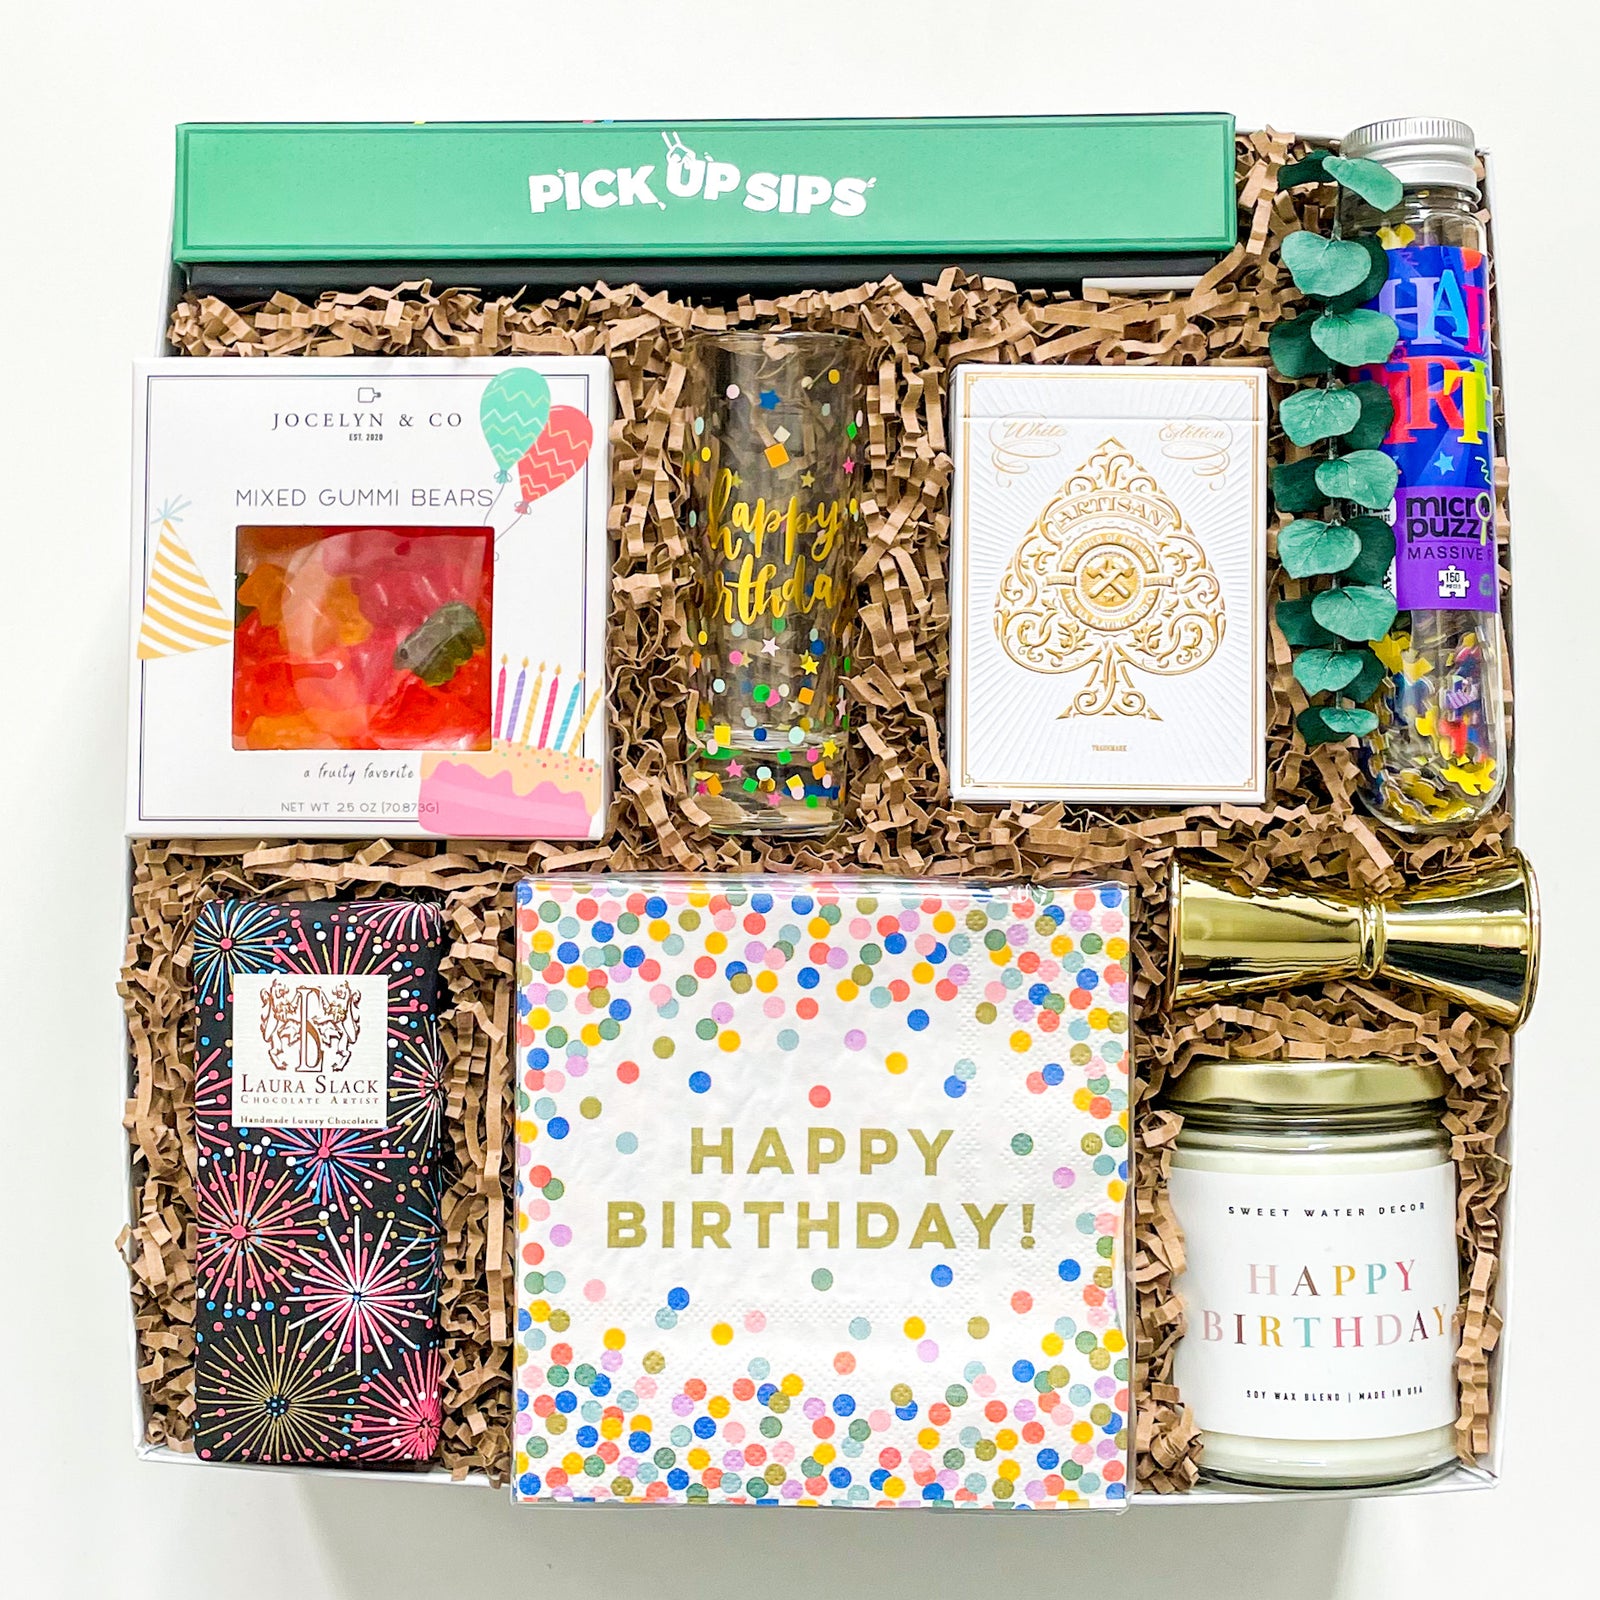 Make Their Birthday Extra Special with Our Thoughtful Gift Boxes! - Black Bow Gift Co.